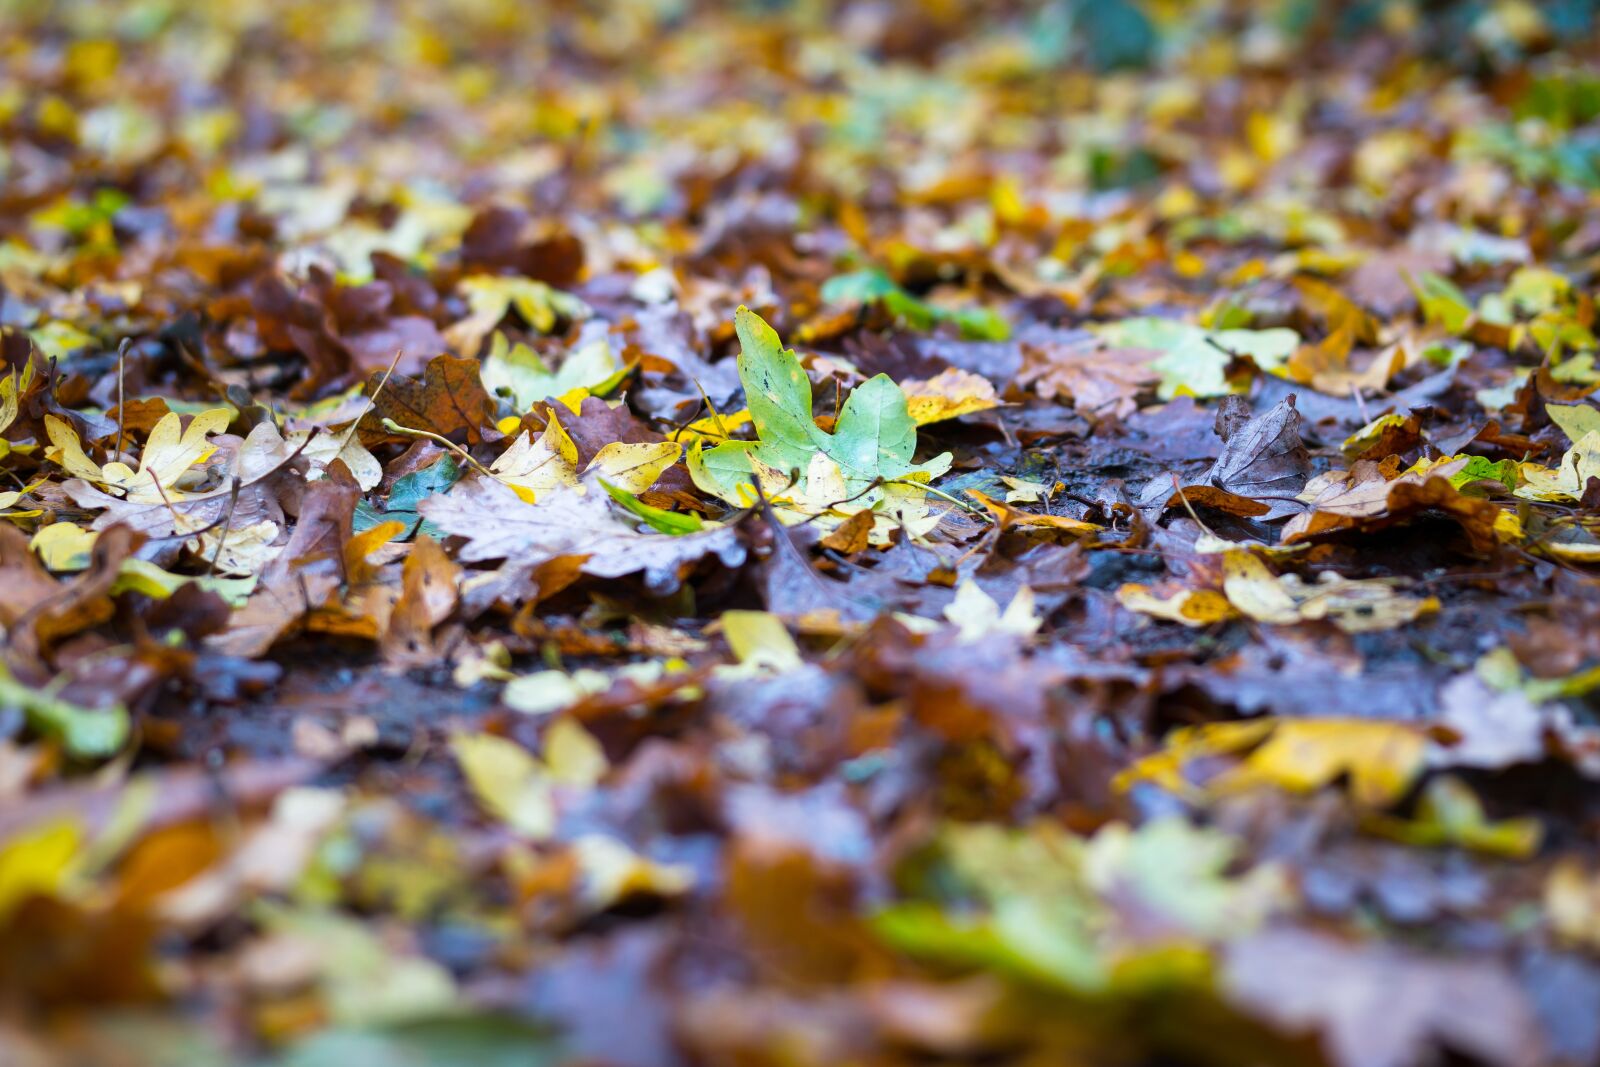 Samsung NX300M sample photo. Autumn, leaves, colorful photography